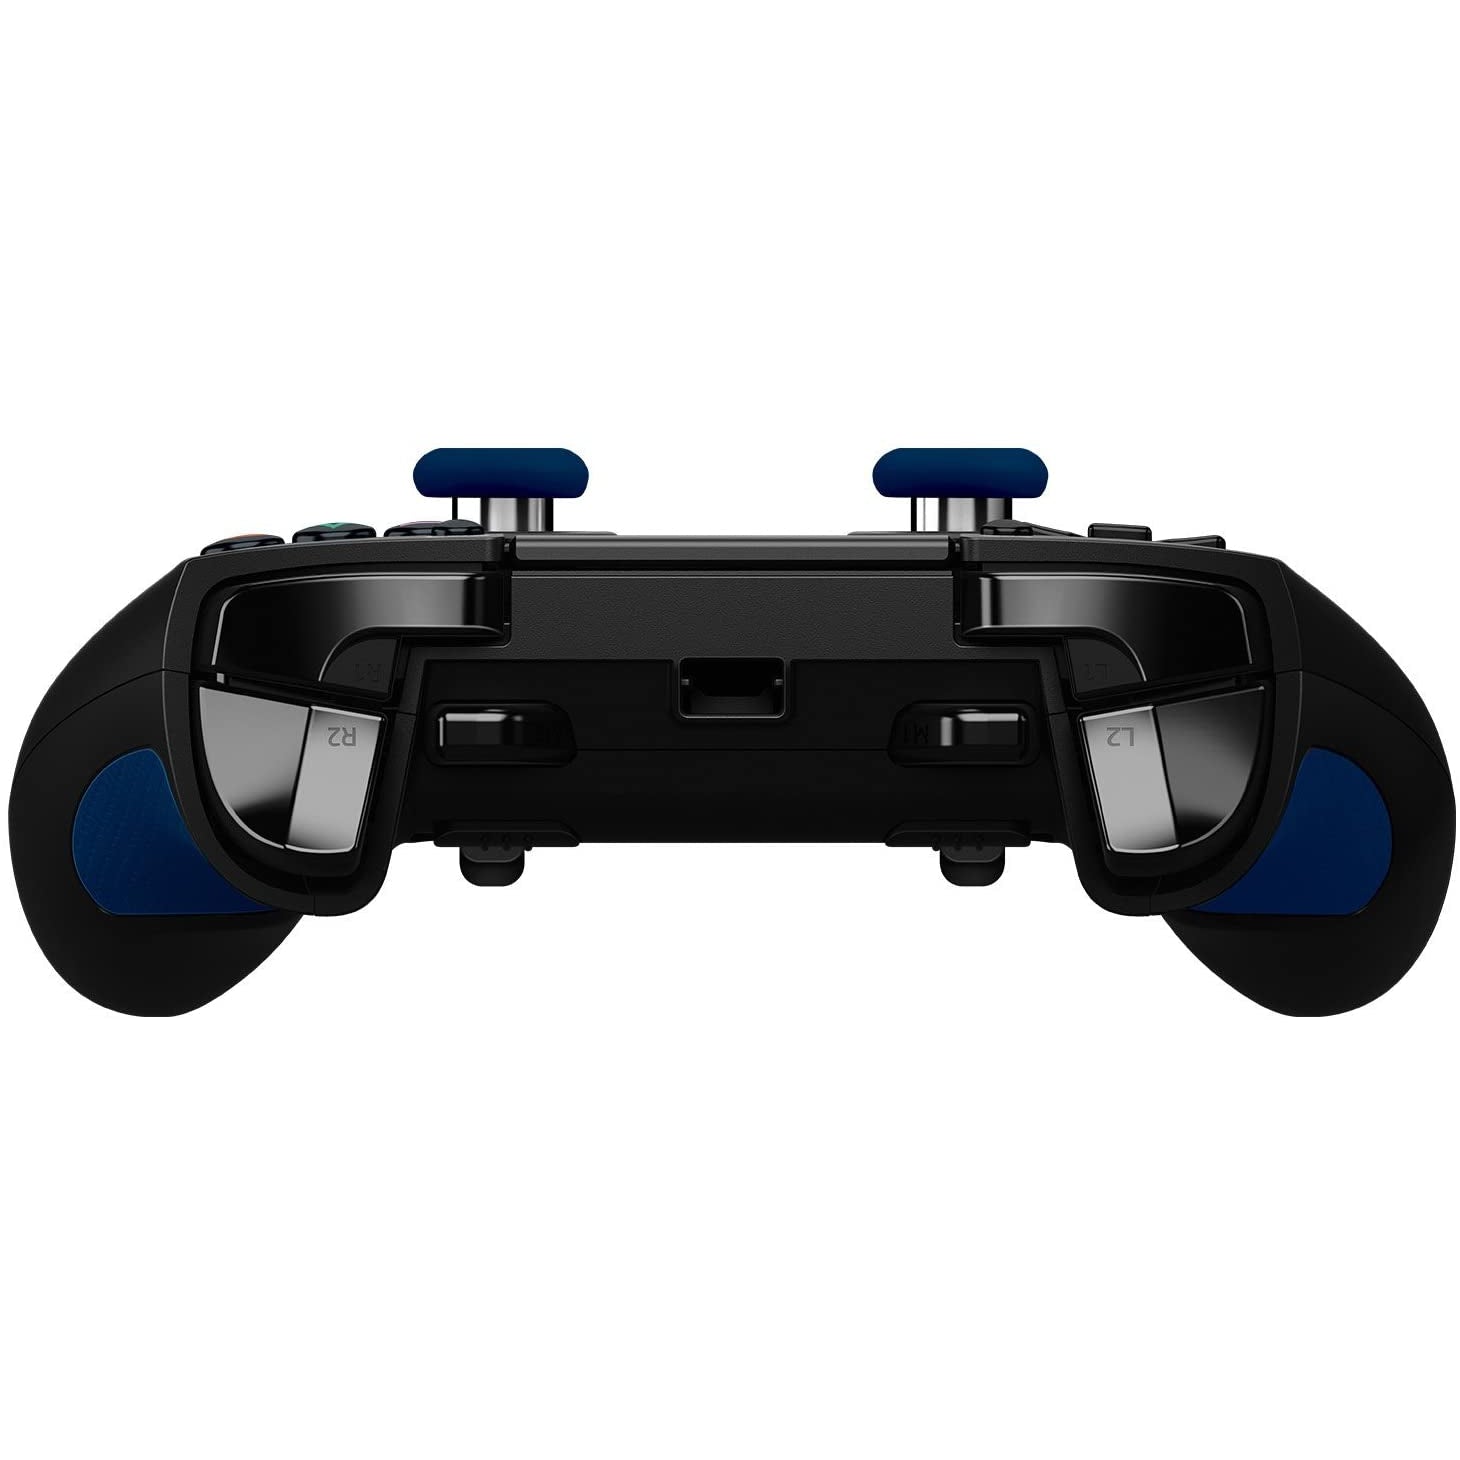 Razer Raiju Official Playstation 4 Gaming Controller (PS4 Controller with Four Programmable Buttons